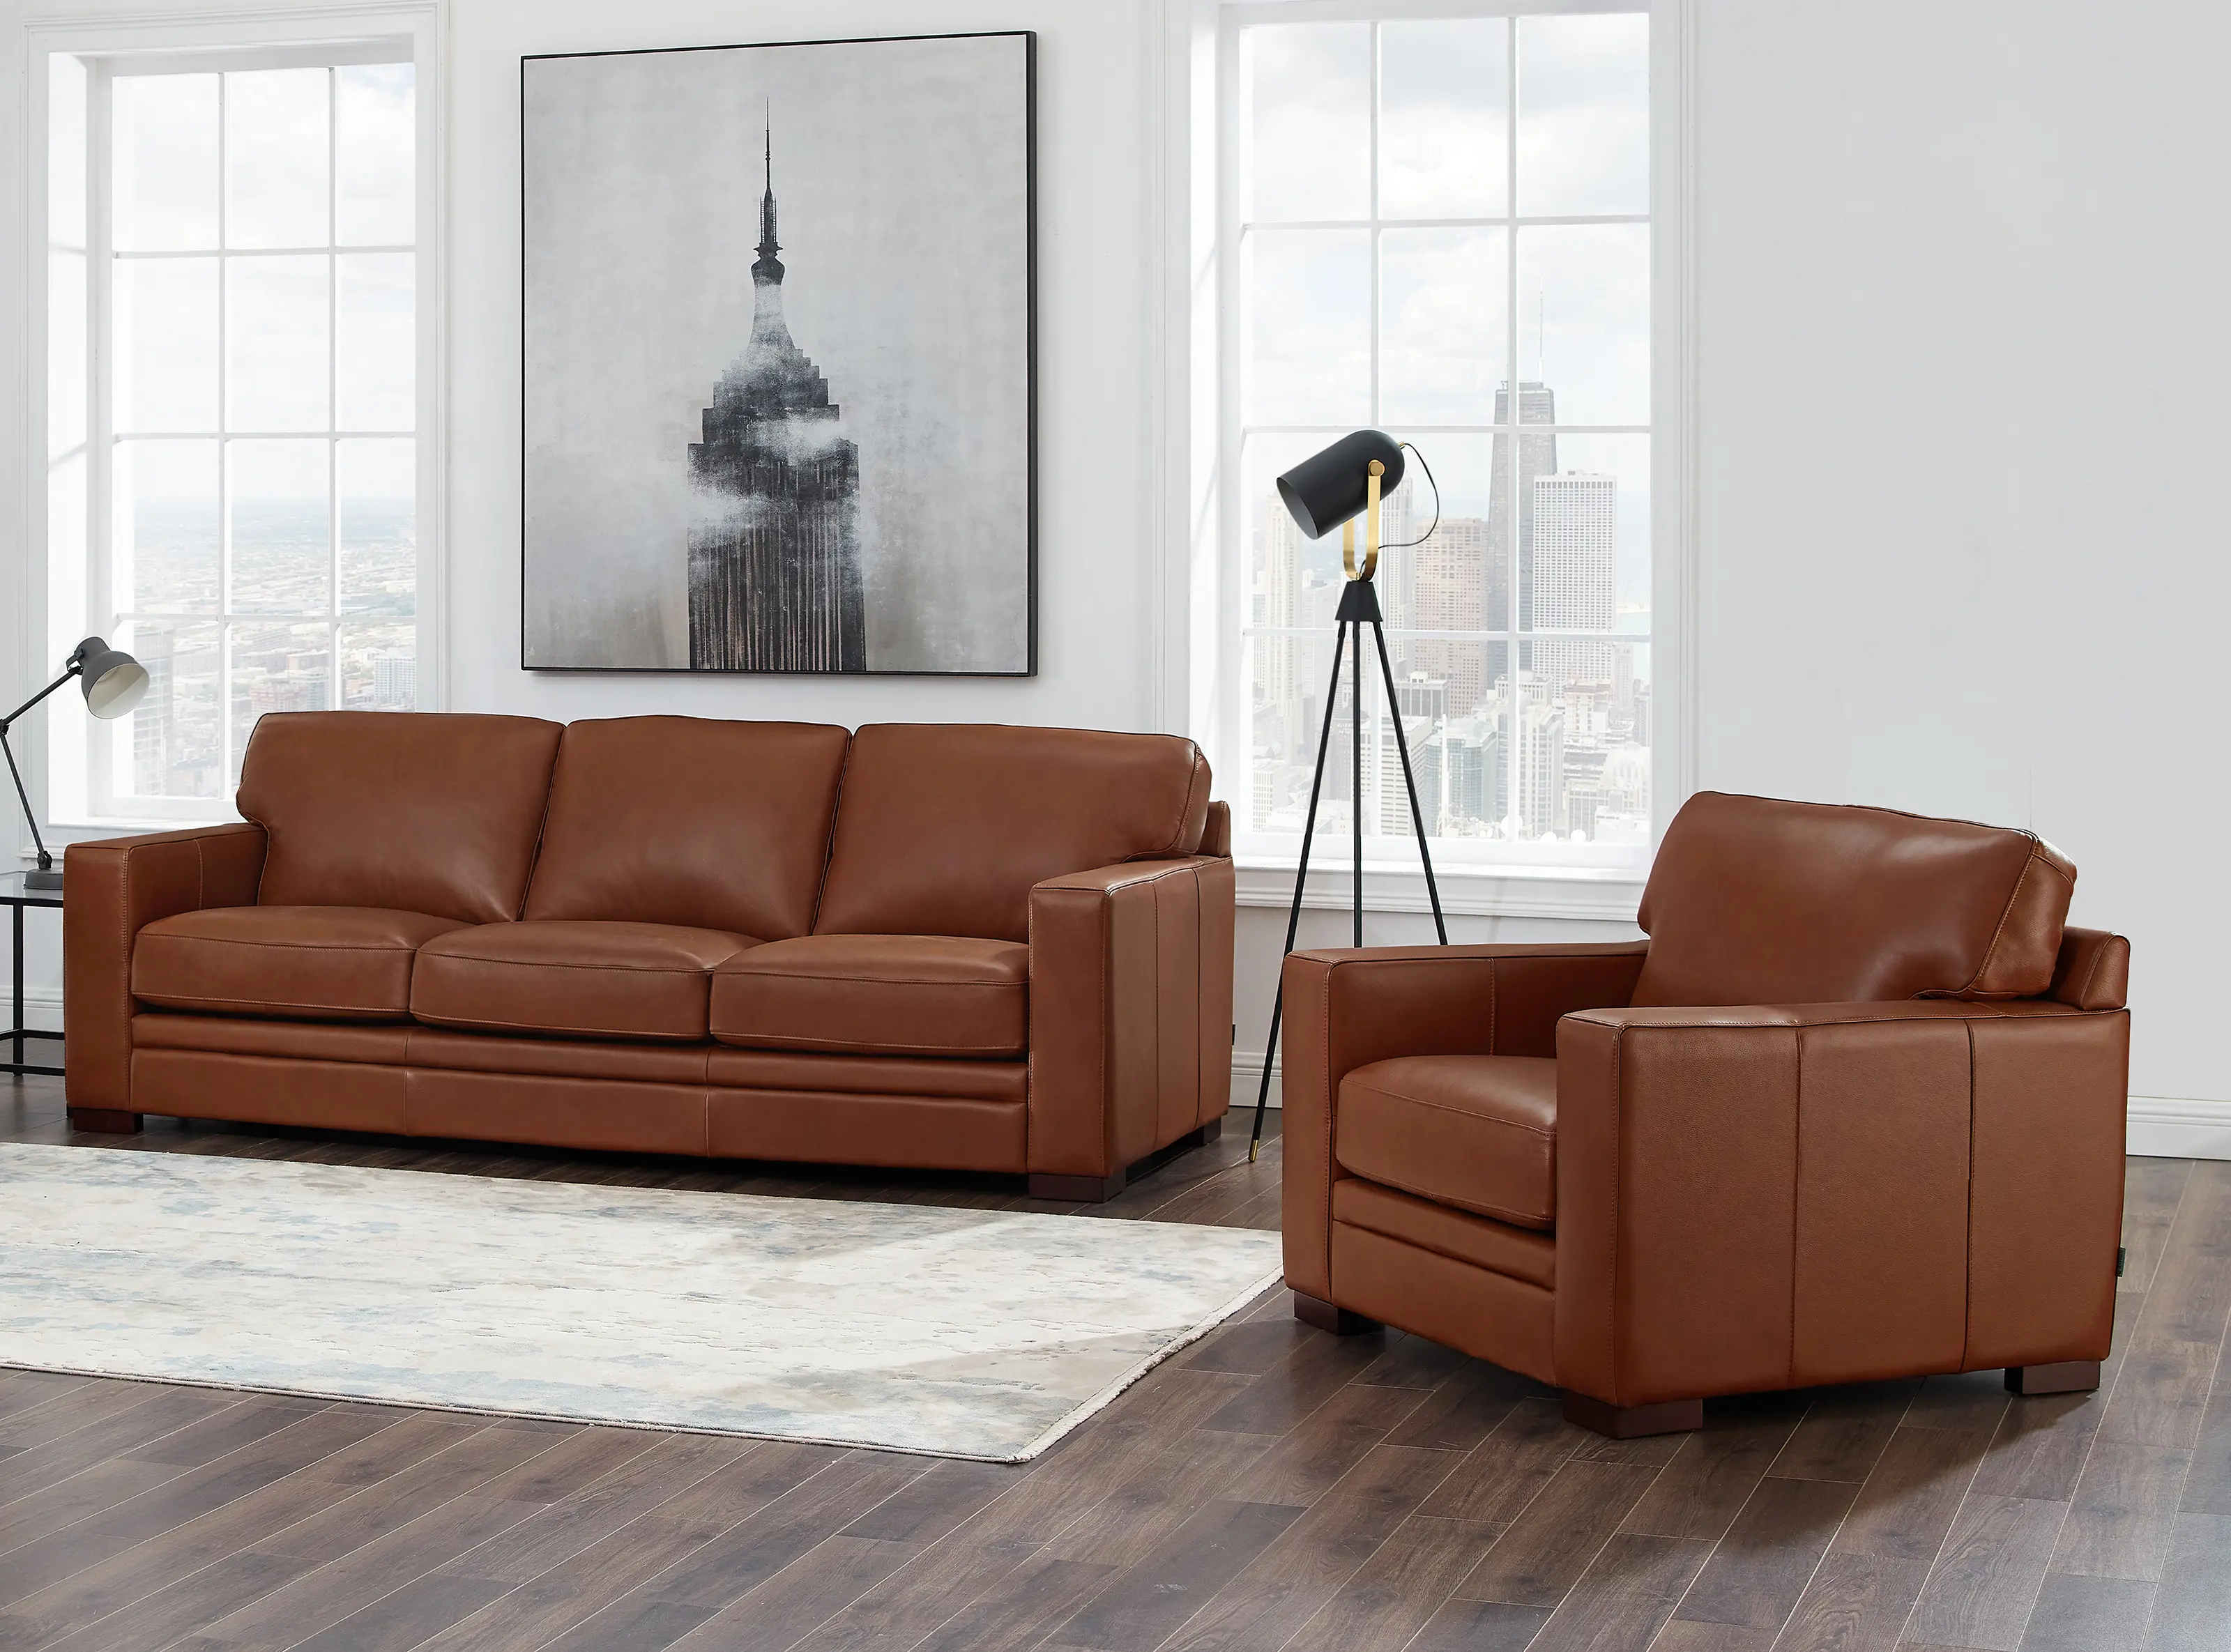 Chatsworth Brown Leather 2 Piece Sofa and Chair Set